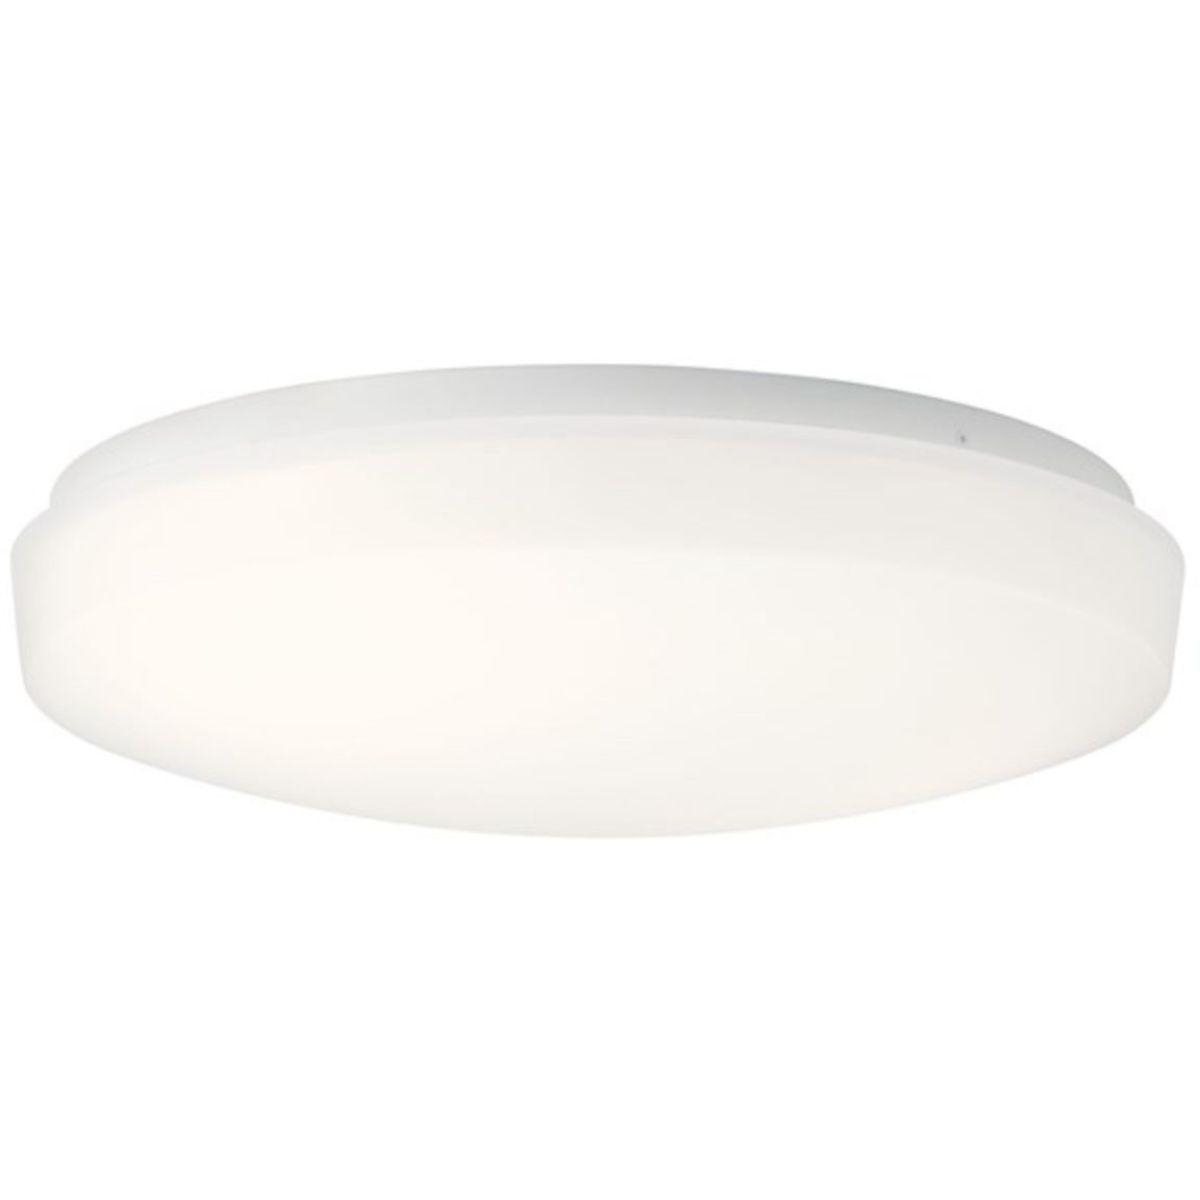 Ceiling Space 14 in. LED Puff Light 1450 Lumens 3000K White finish